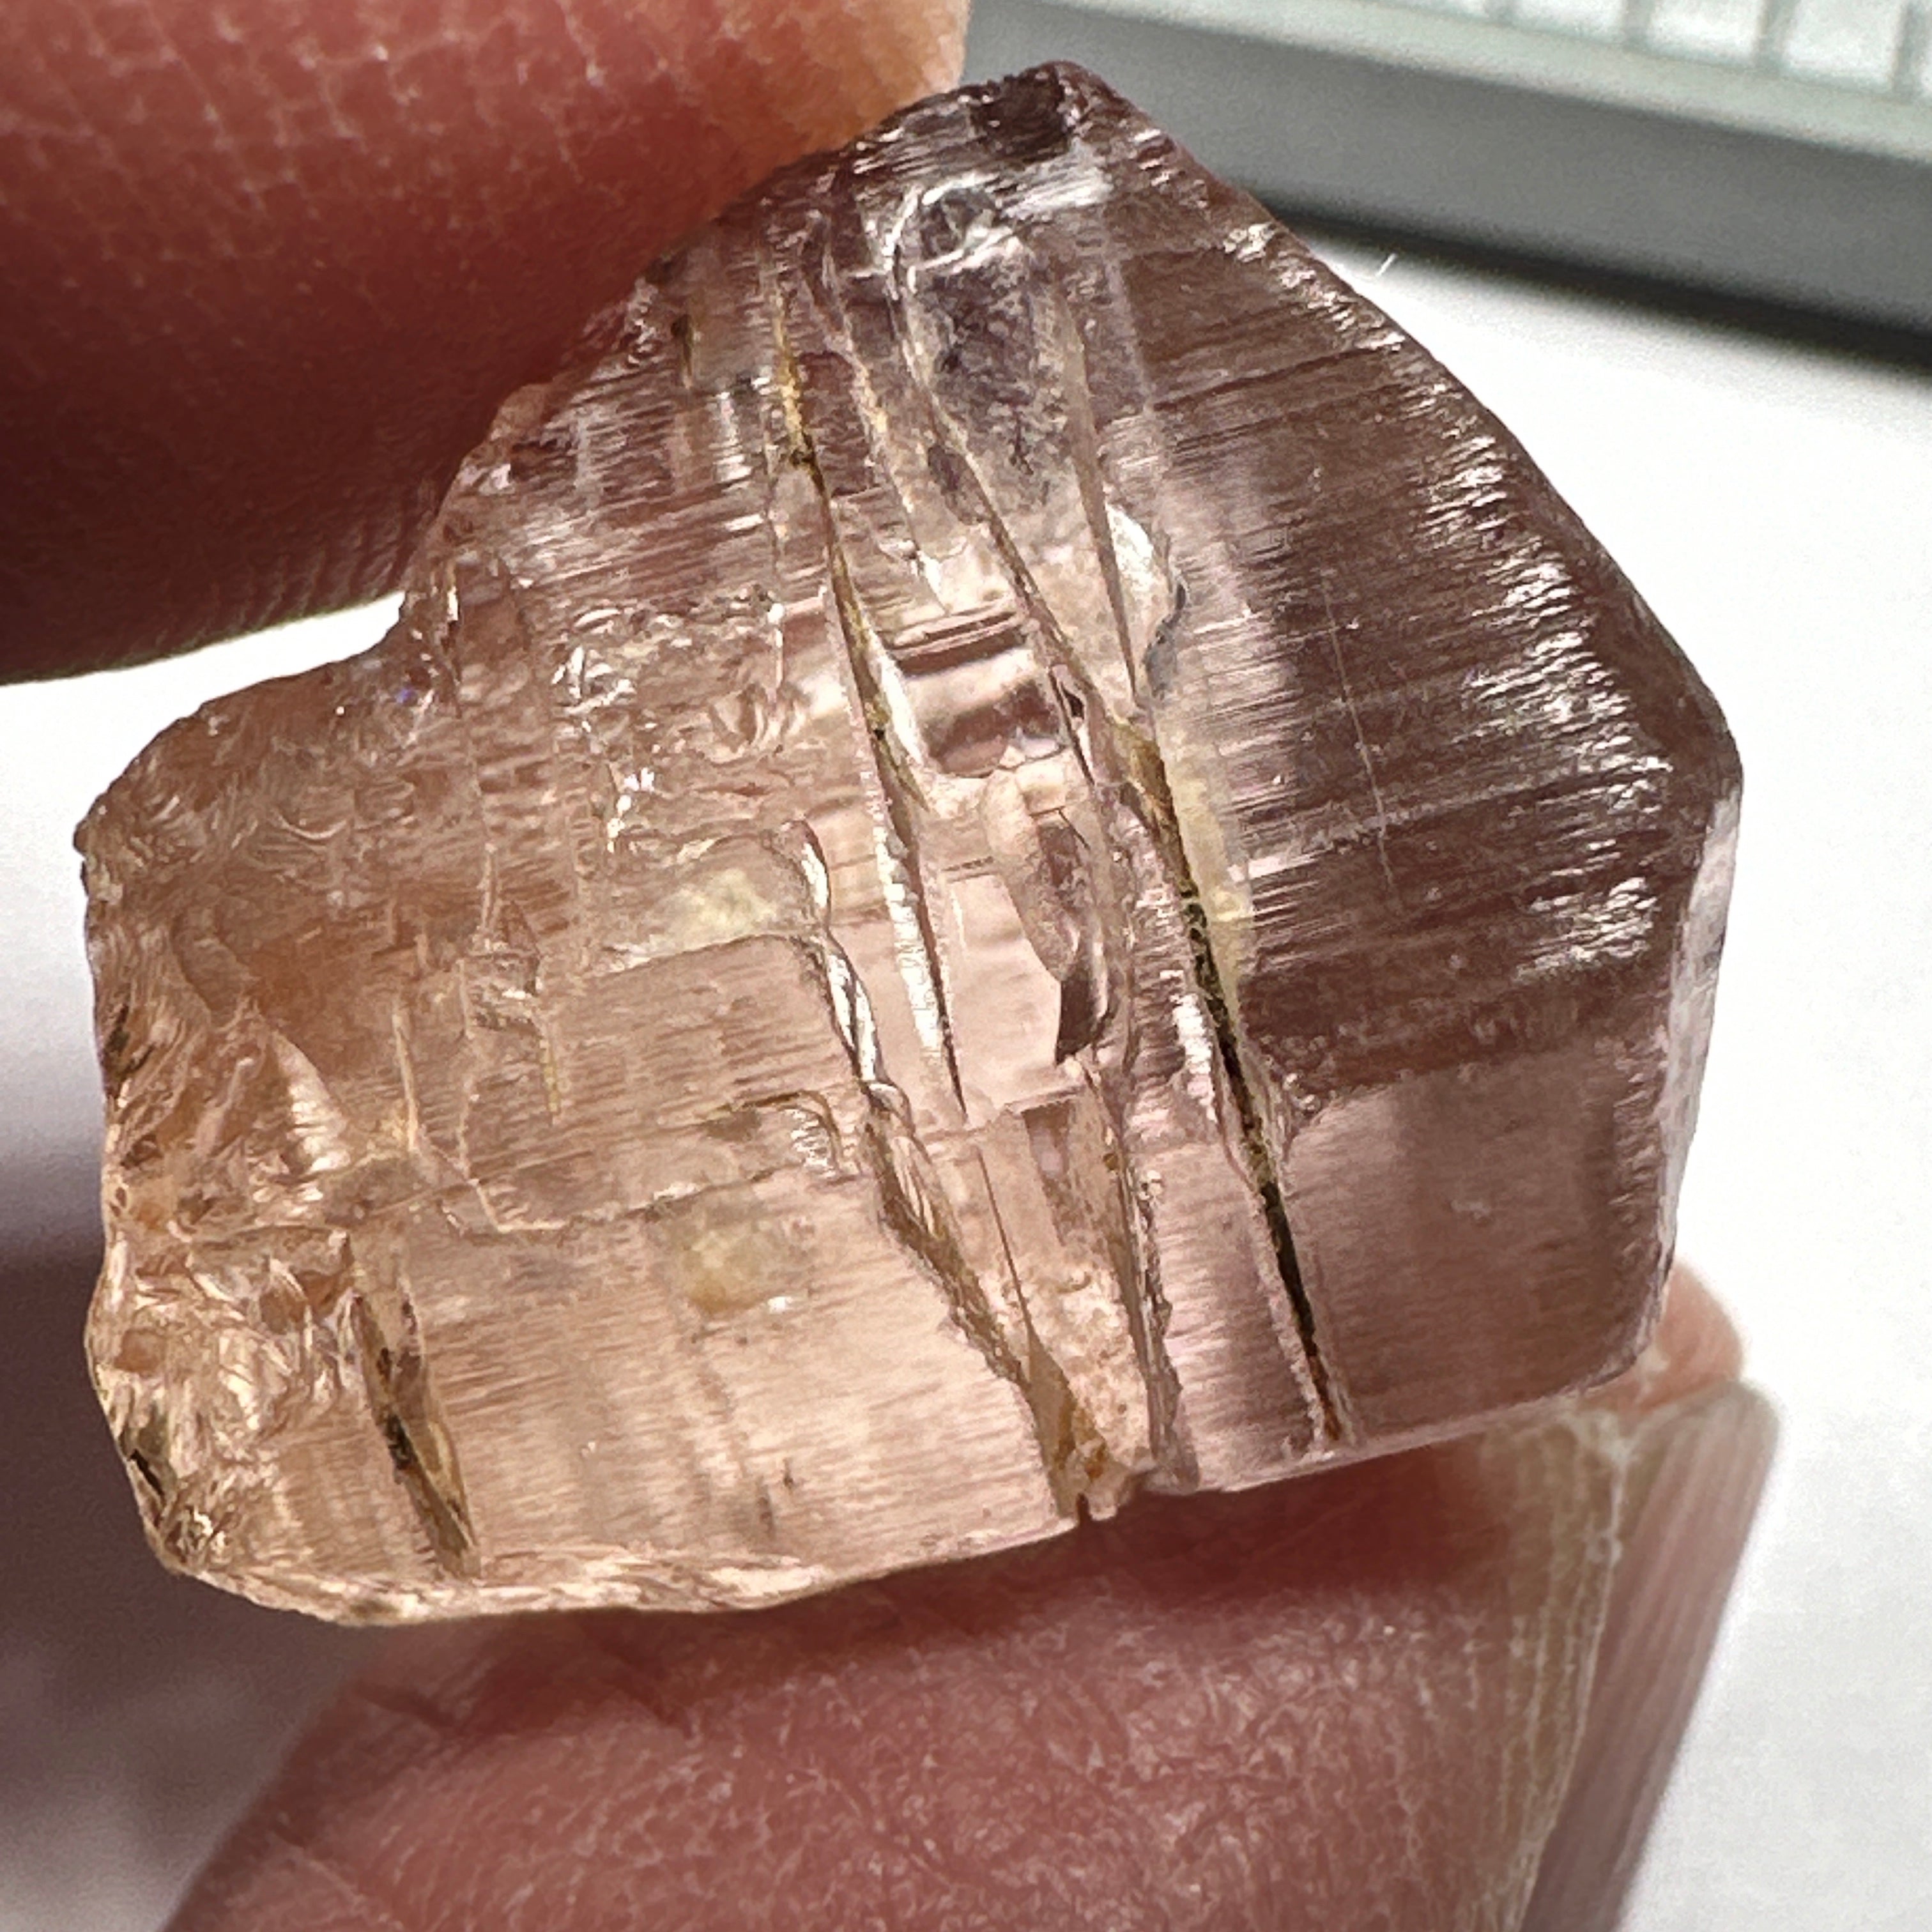 23.82ct Very Rare, Peach Pink Scapolite, Tanzania, Untreated Unheated, VVS-IF (flawless)